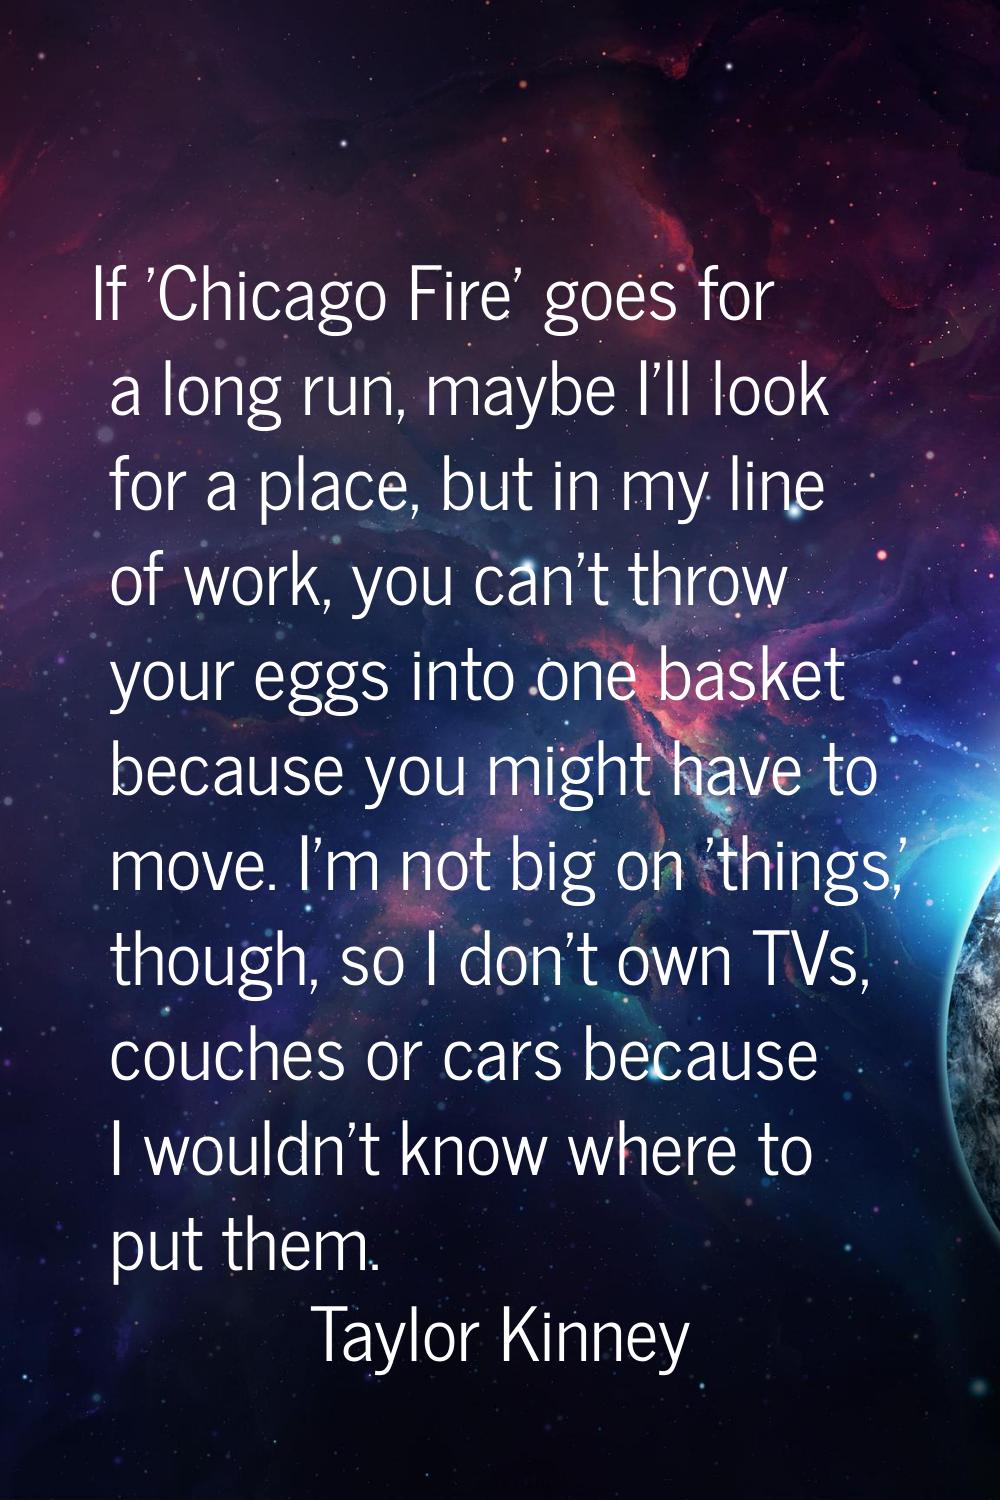 If 'Chicago Fire' goes for a long run, maybe I'll look for a place, but in my line of work, you can